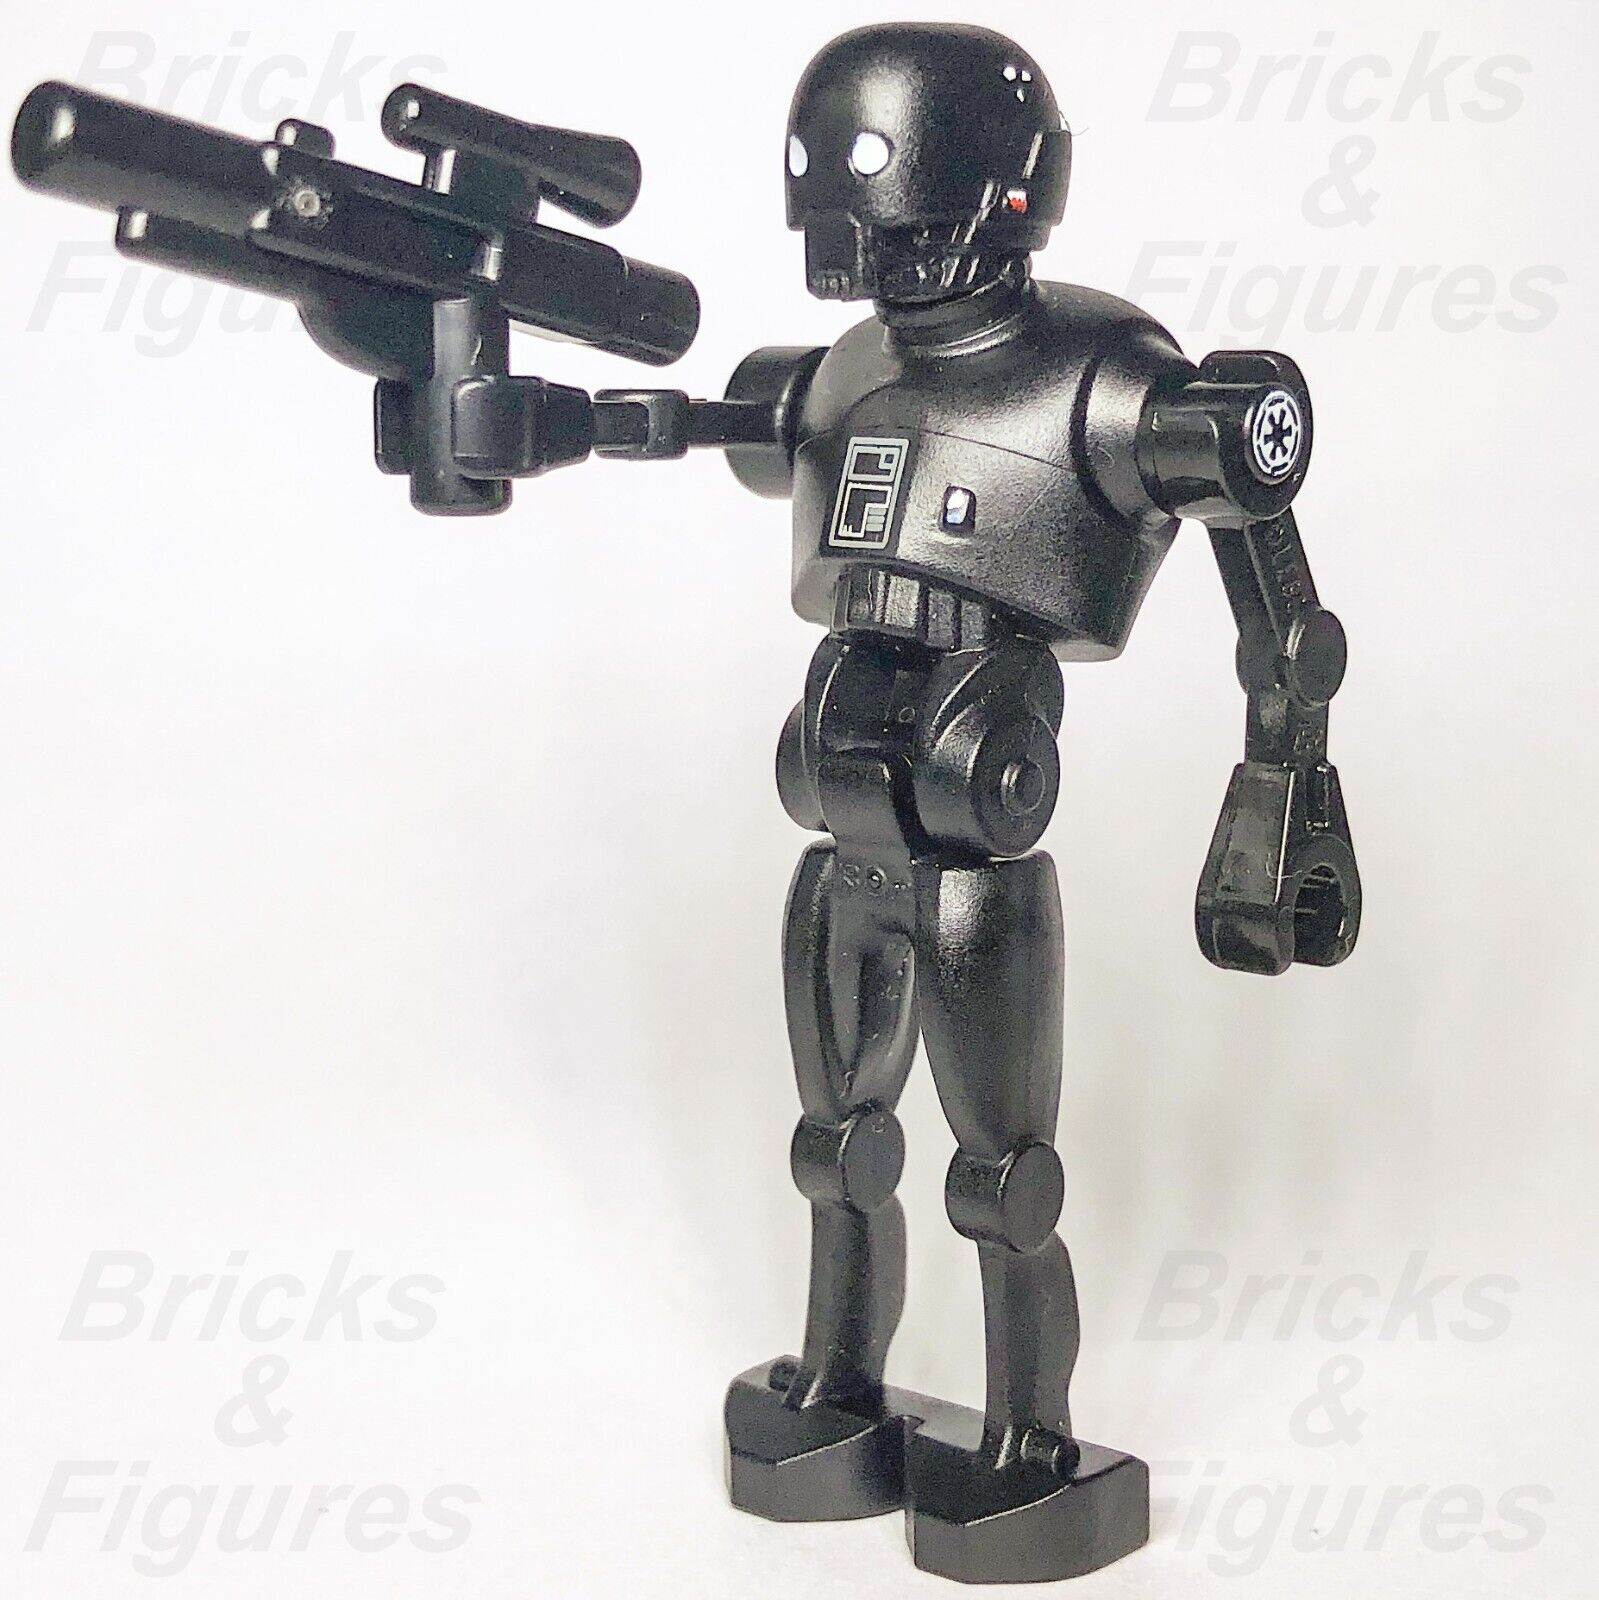 LEGO Star Wars K-2SO Security Droid Minifigure Rogue One sw0782 75156 Minifig 1